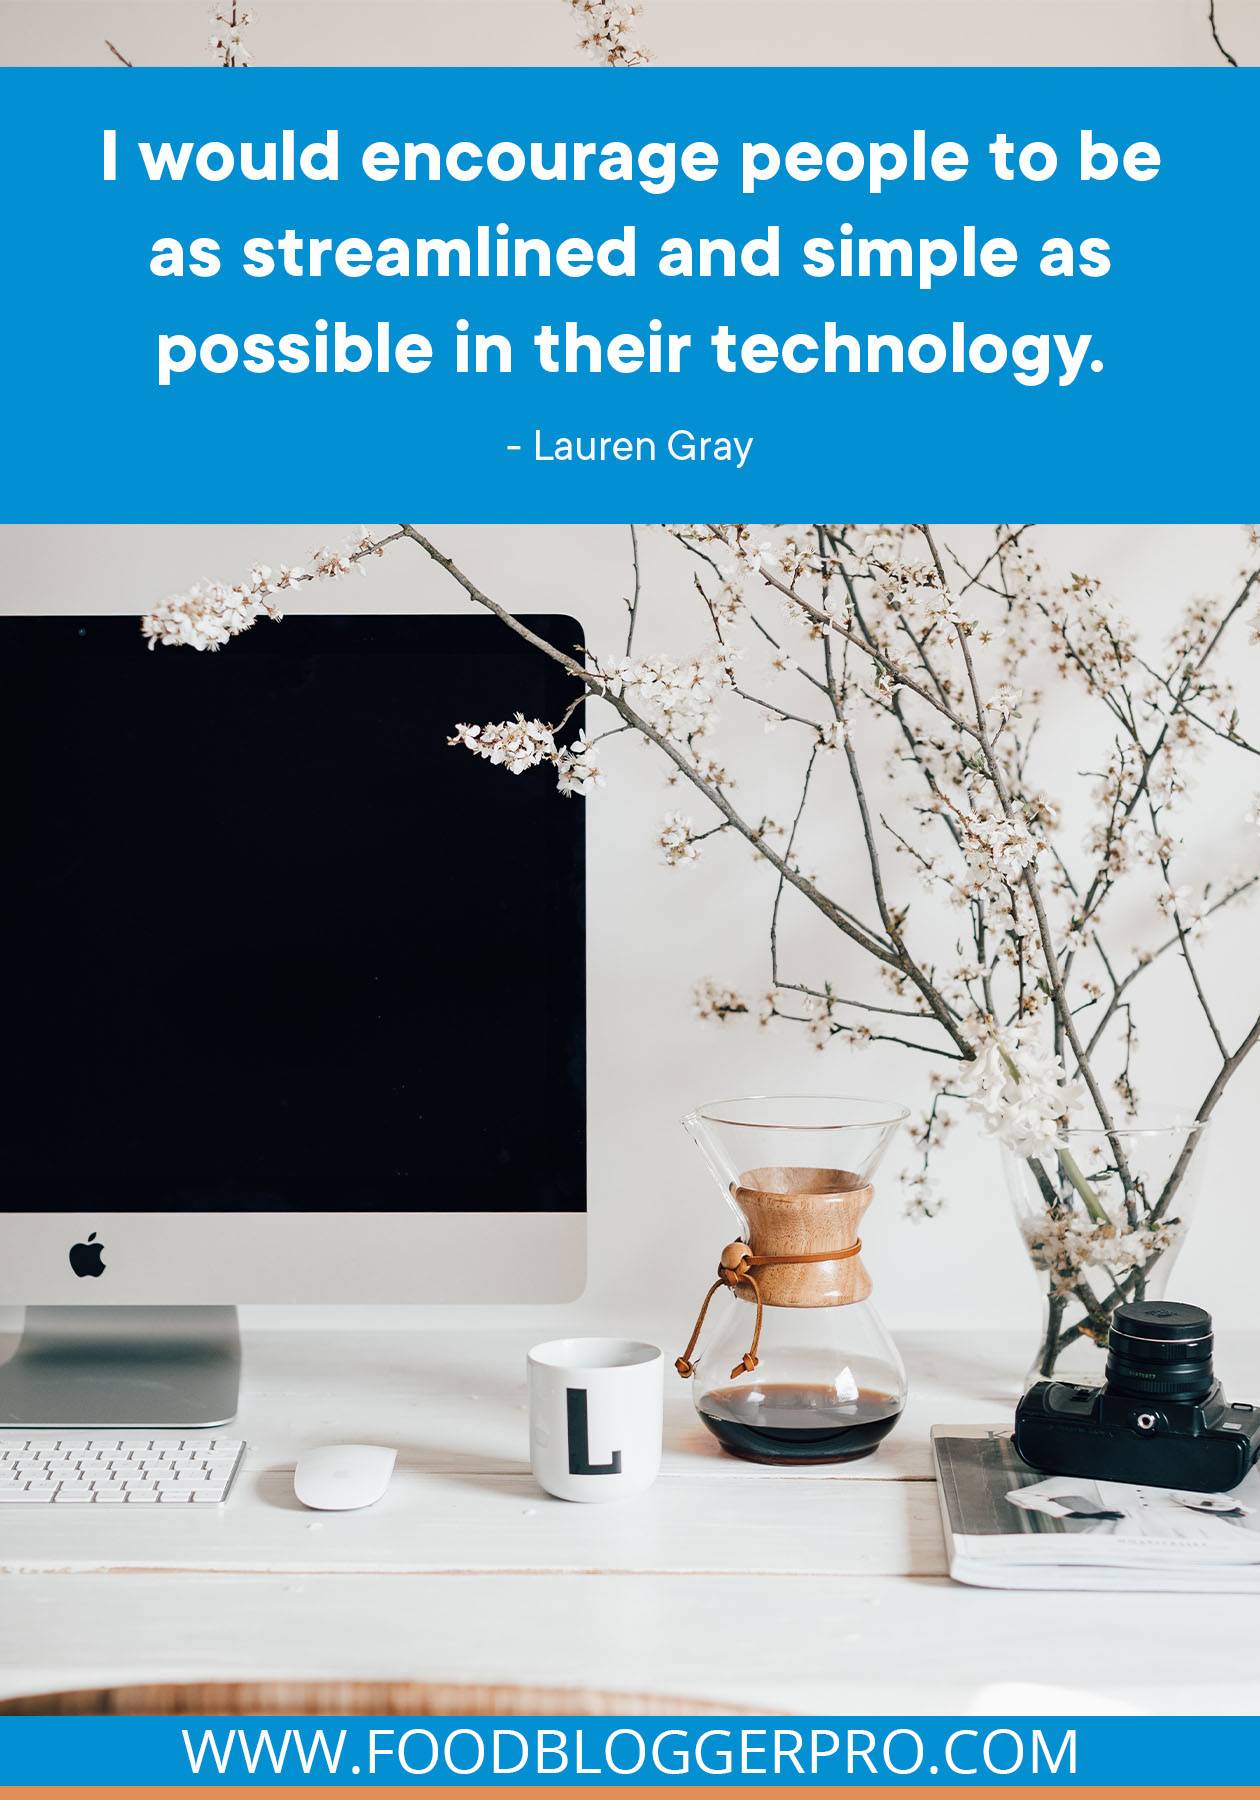 A photograph of a desk with a computer, coffee, and flowering branches on it and a quote from Lauren Gray's episode of The Food Blogger Pro Podcast: "I would encourage people to be as streamlined and simple as possible in their technology."